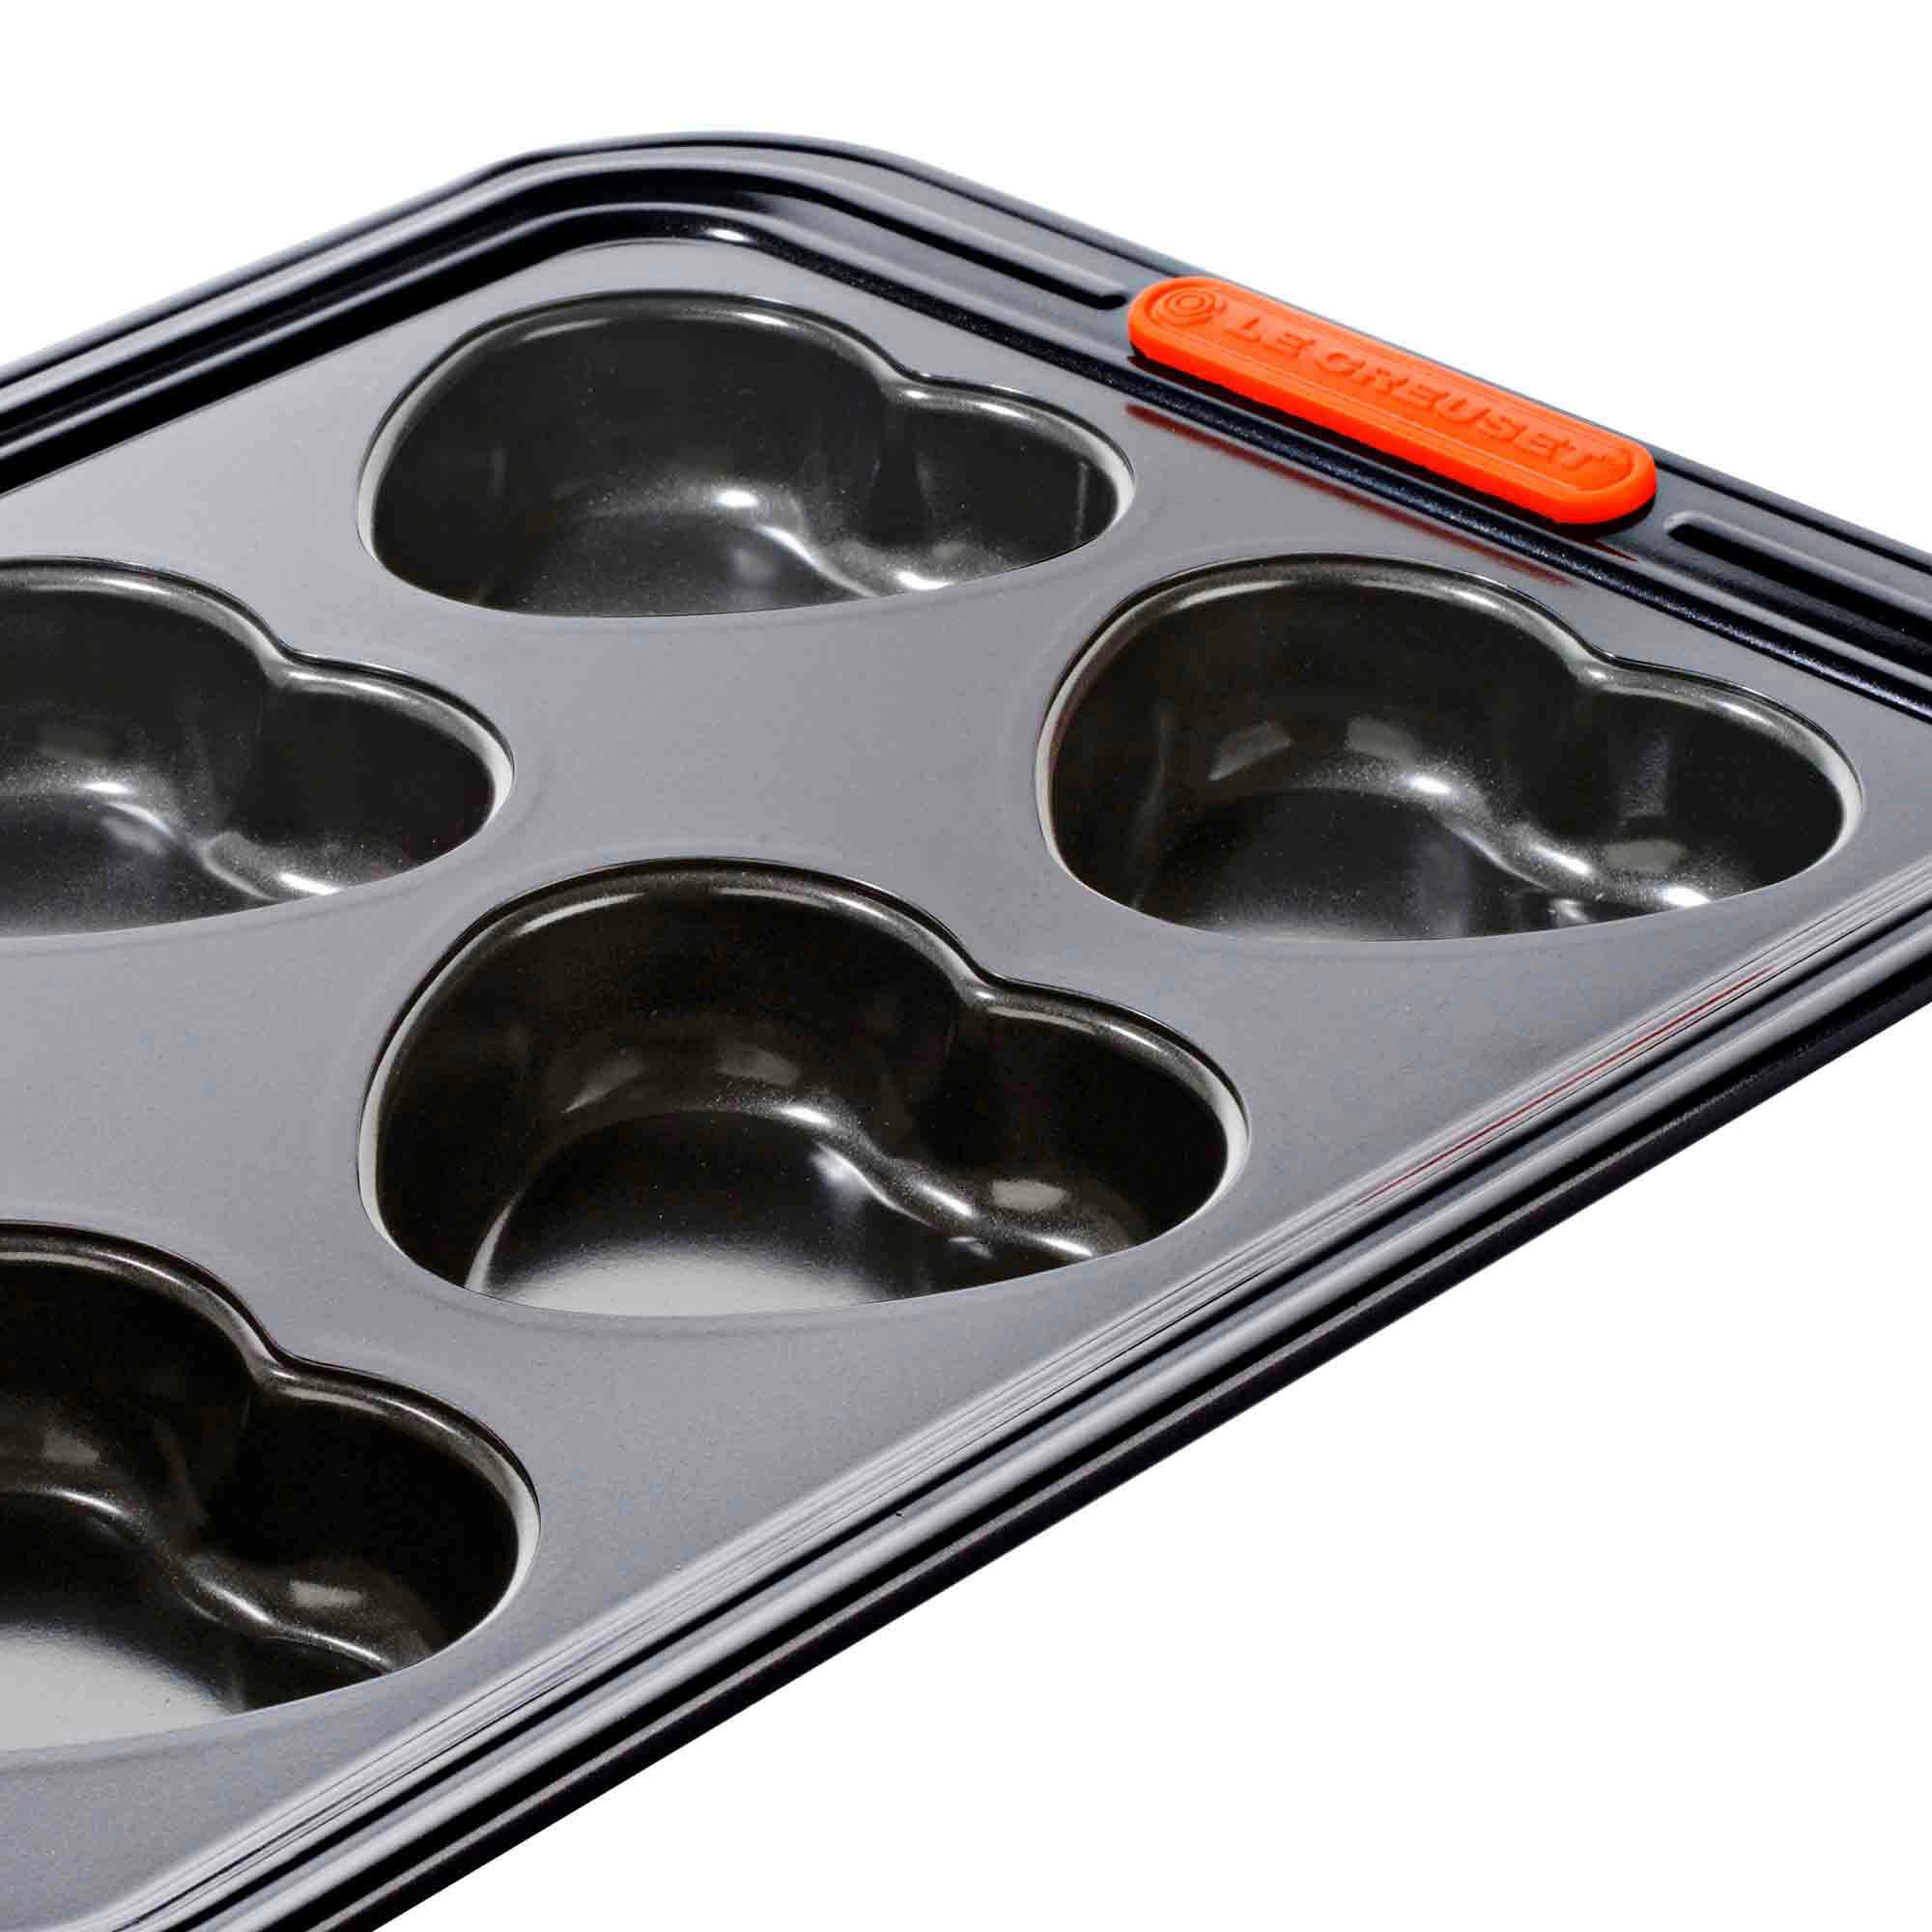 Le Creuset Toughened Non Stick Heart Shaped Muffin Tray 6 Cup Image 2